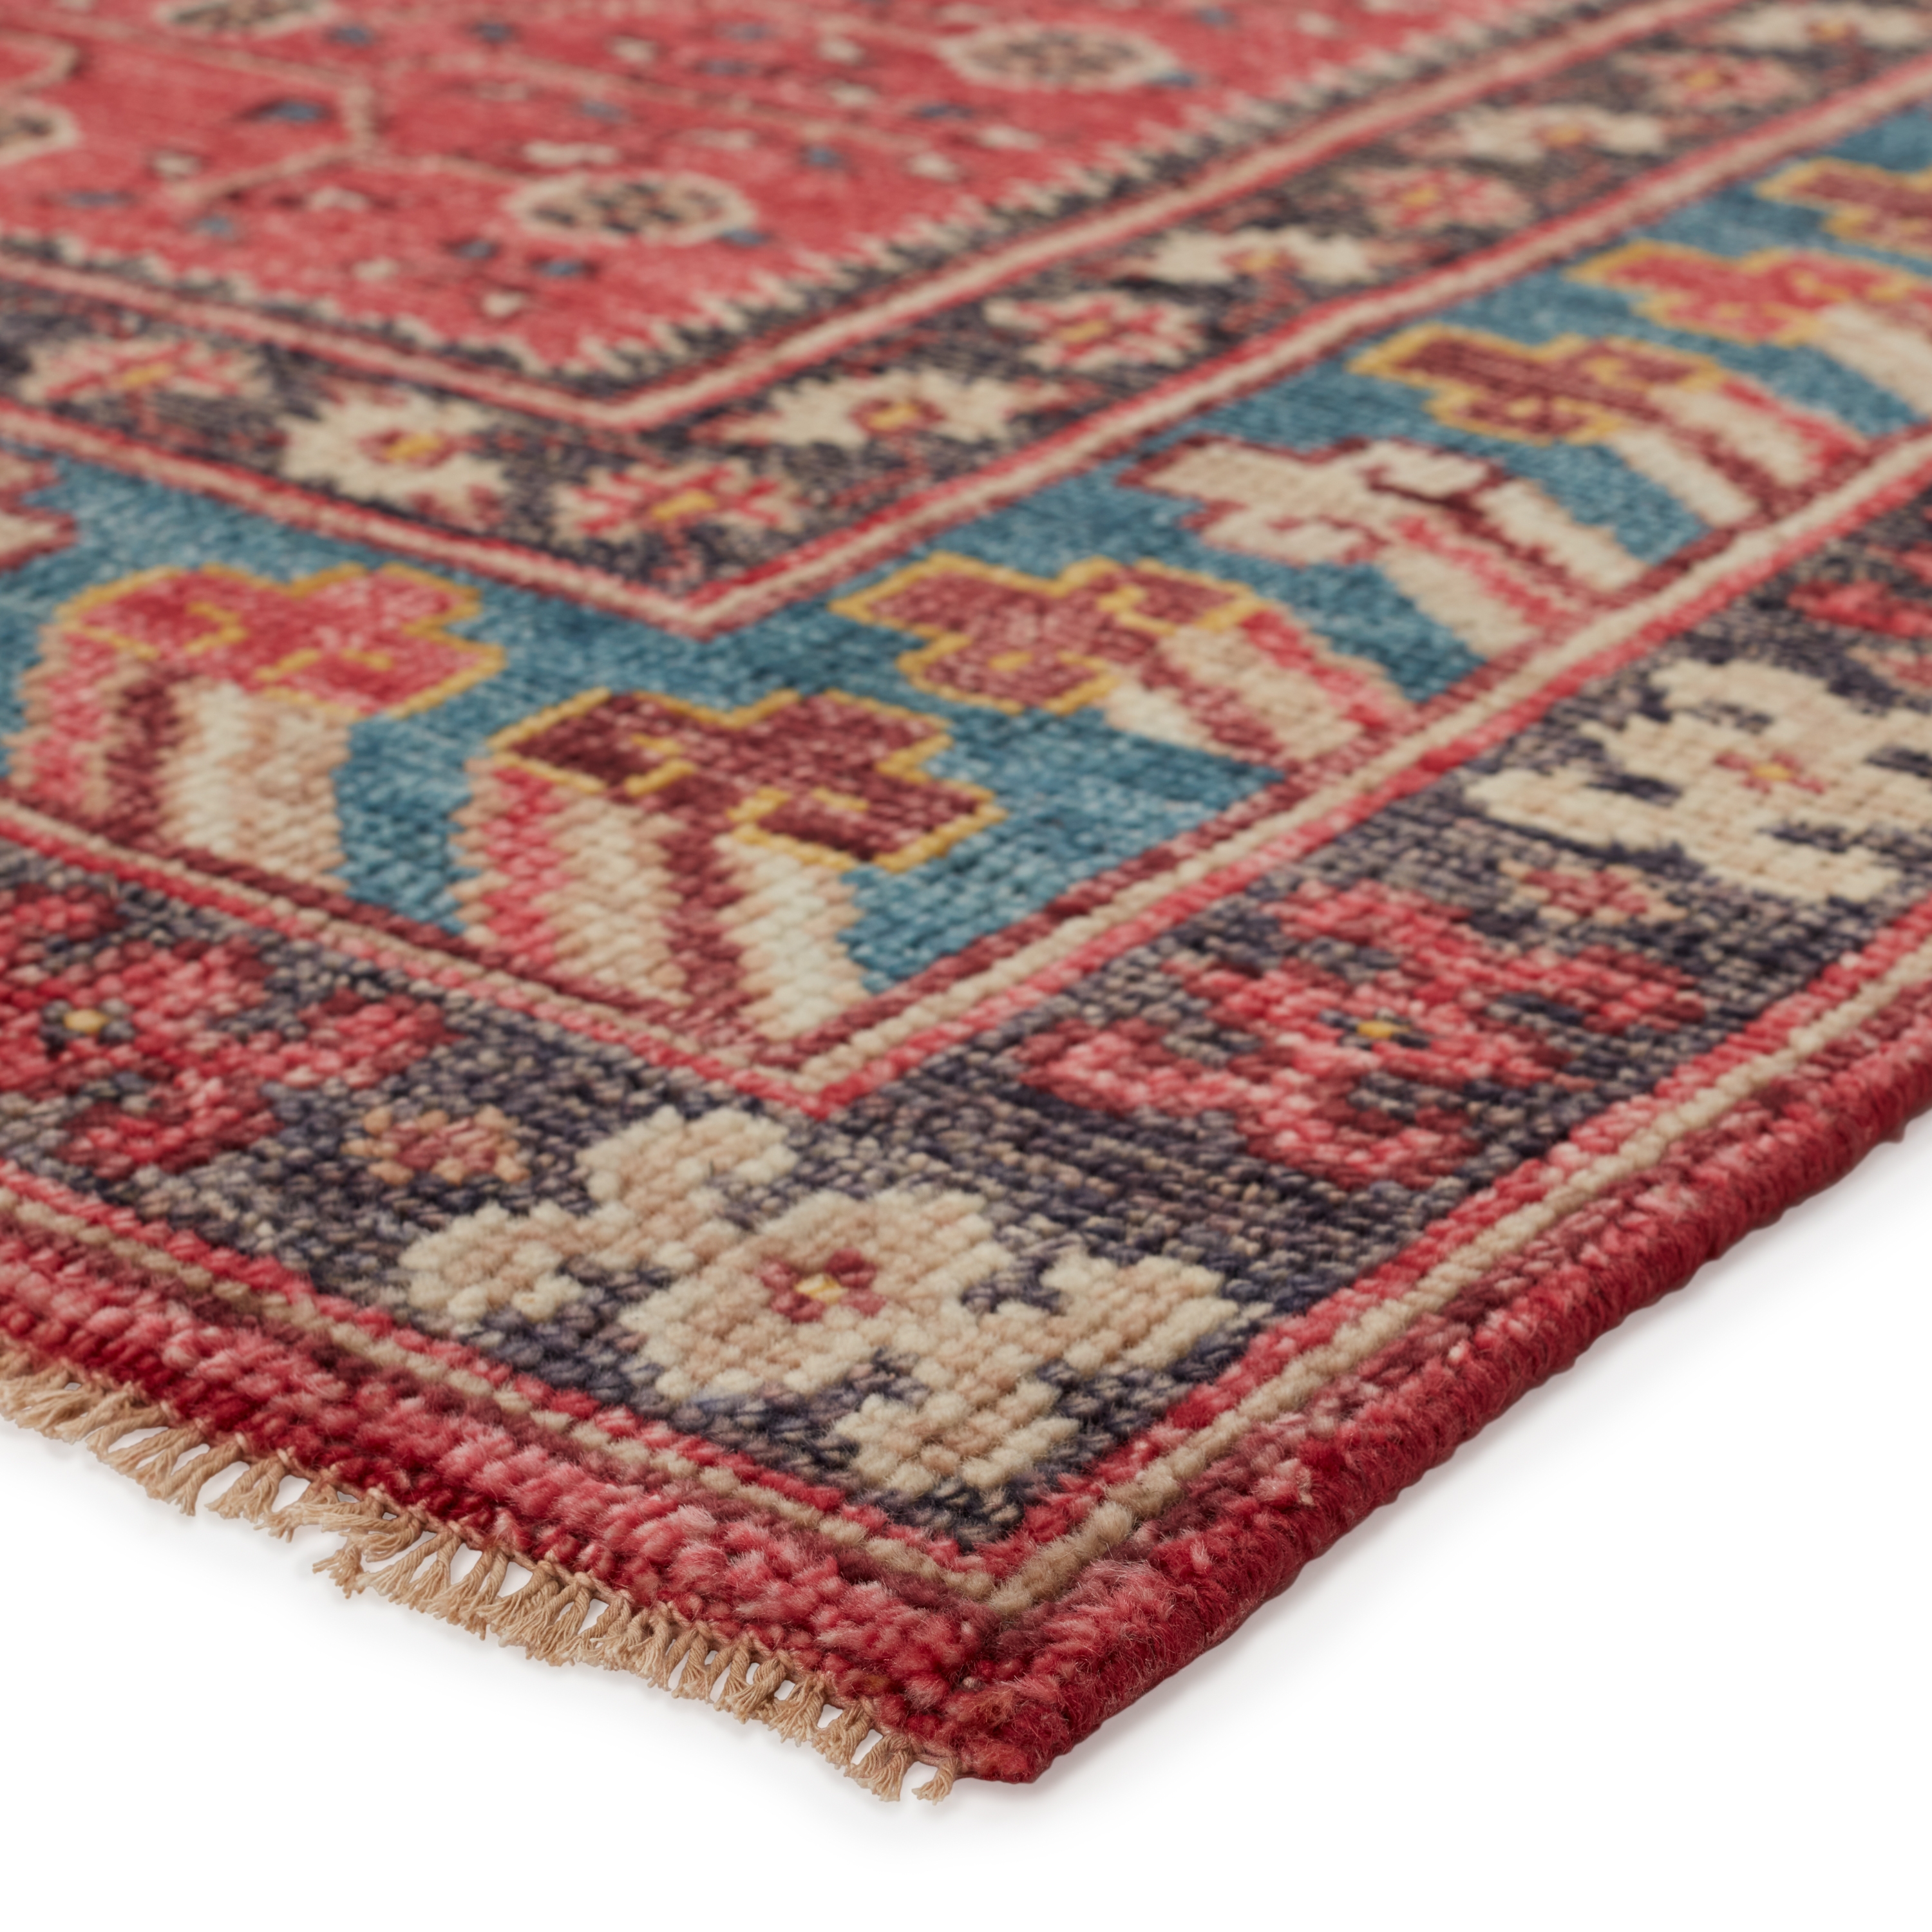 Donte Hand-Knotted Oriental Red/ Blue Area Rug (6'X9') - Image 1